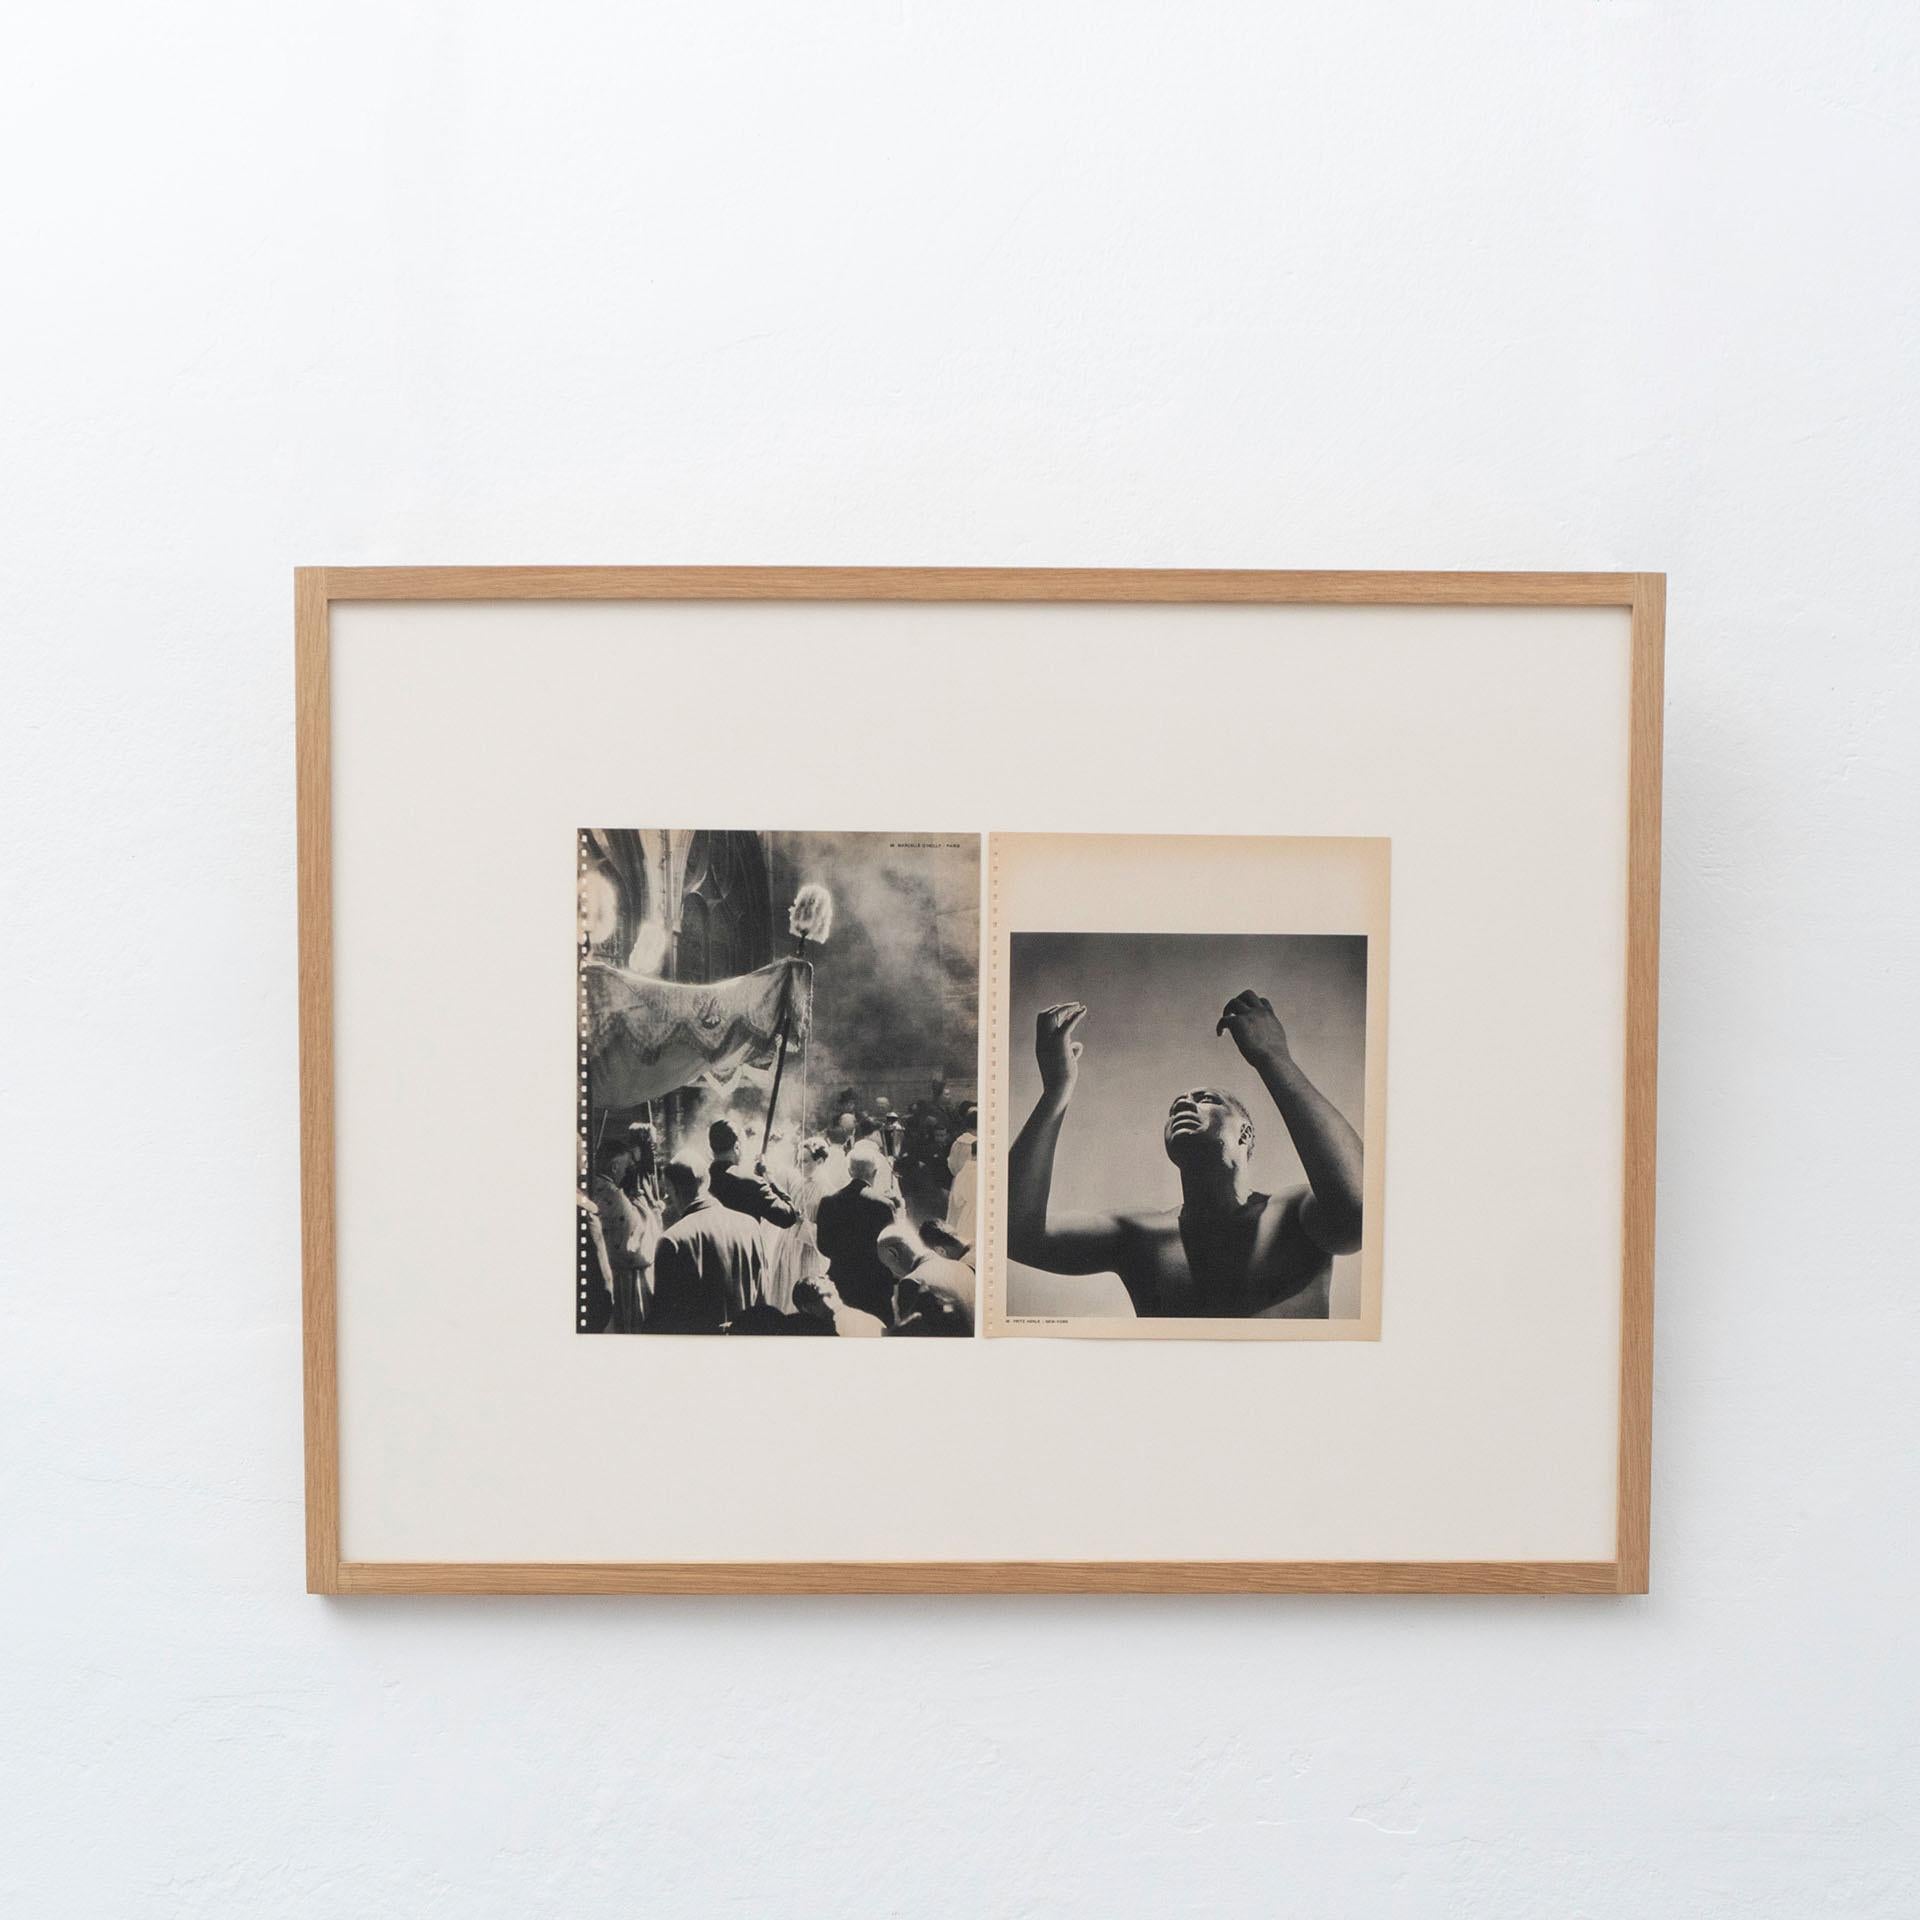 Vintage photo gravure by the photographers Marcelle D'Heily and Fritz Henle, circa 1940.
Wood frame with passepartout and high quality museum's glass.

In original condition, with minor wear consistent with age and use, preserving a beautiful